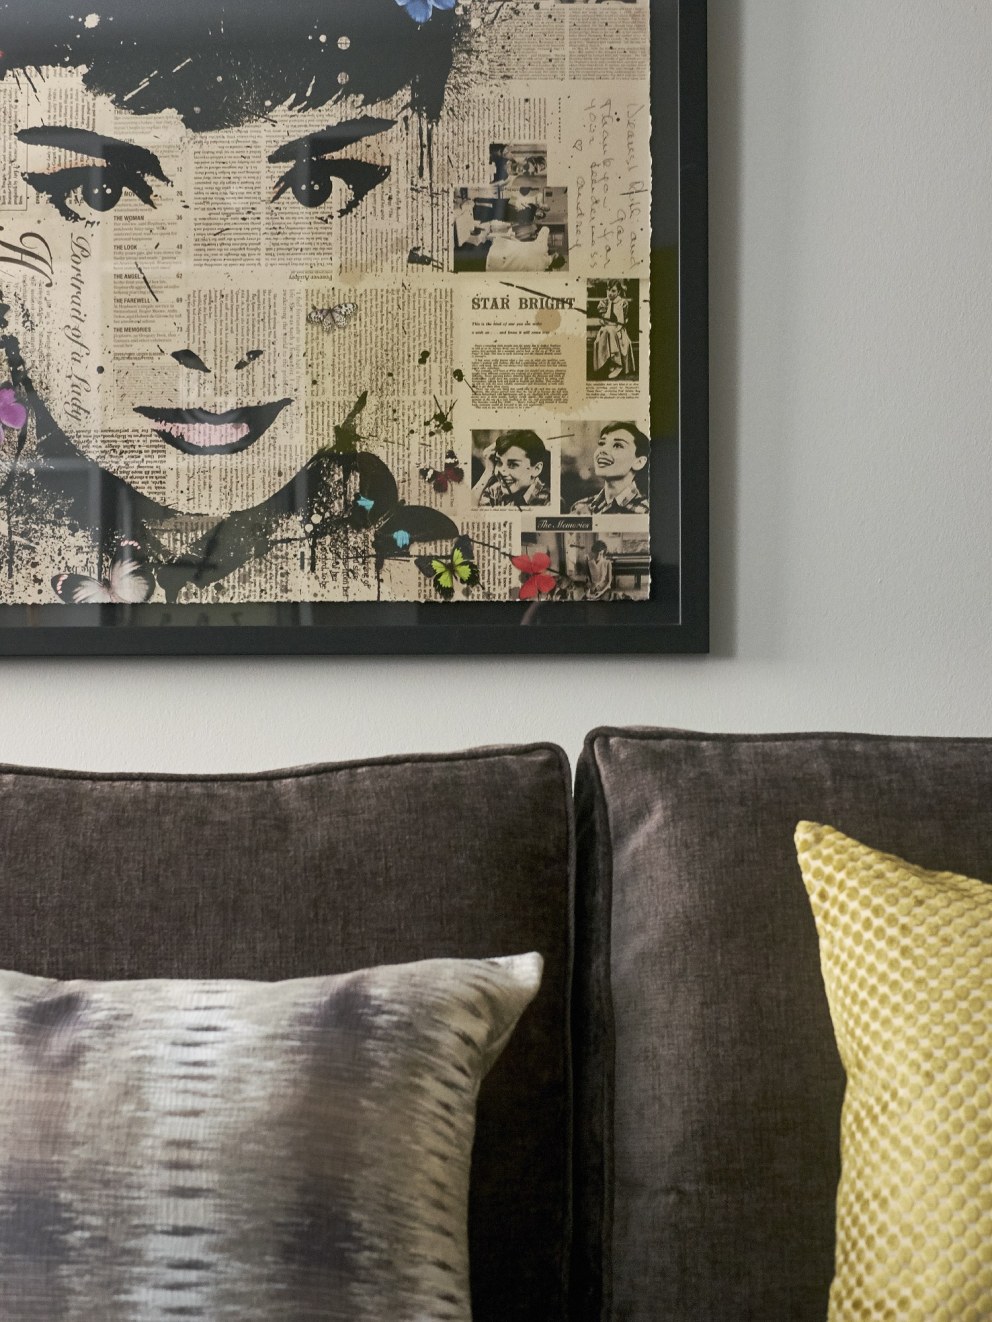 Apartment in the city  | Detail of bespoke sofa, cushions and striking artwork  | Interior Designers